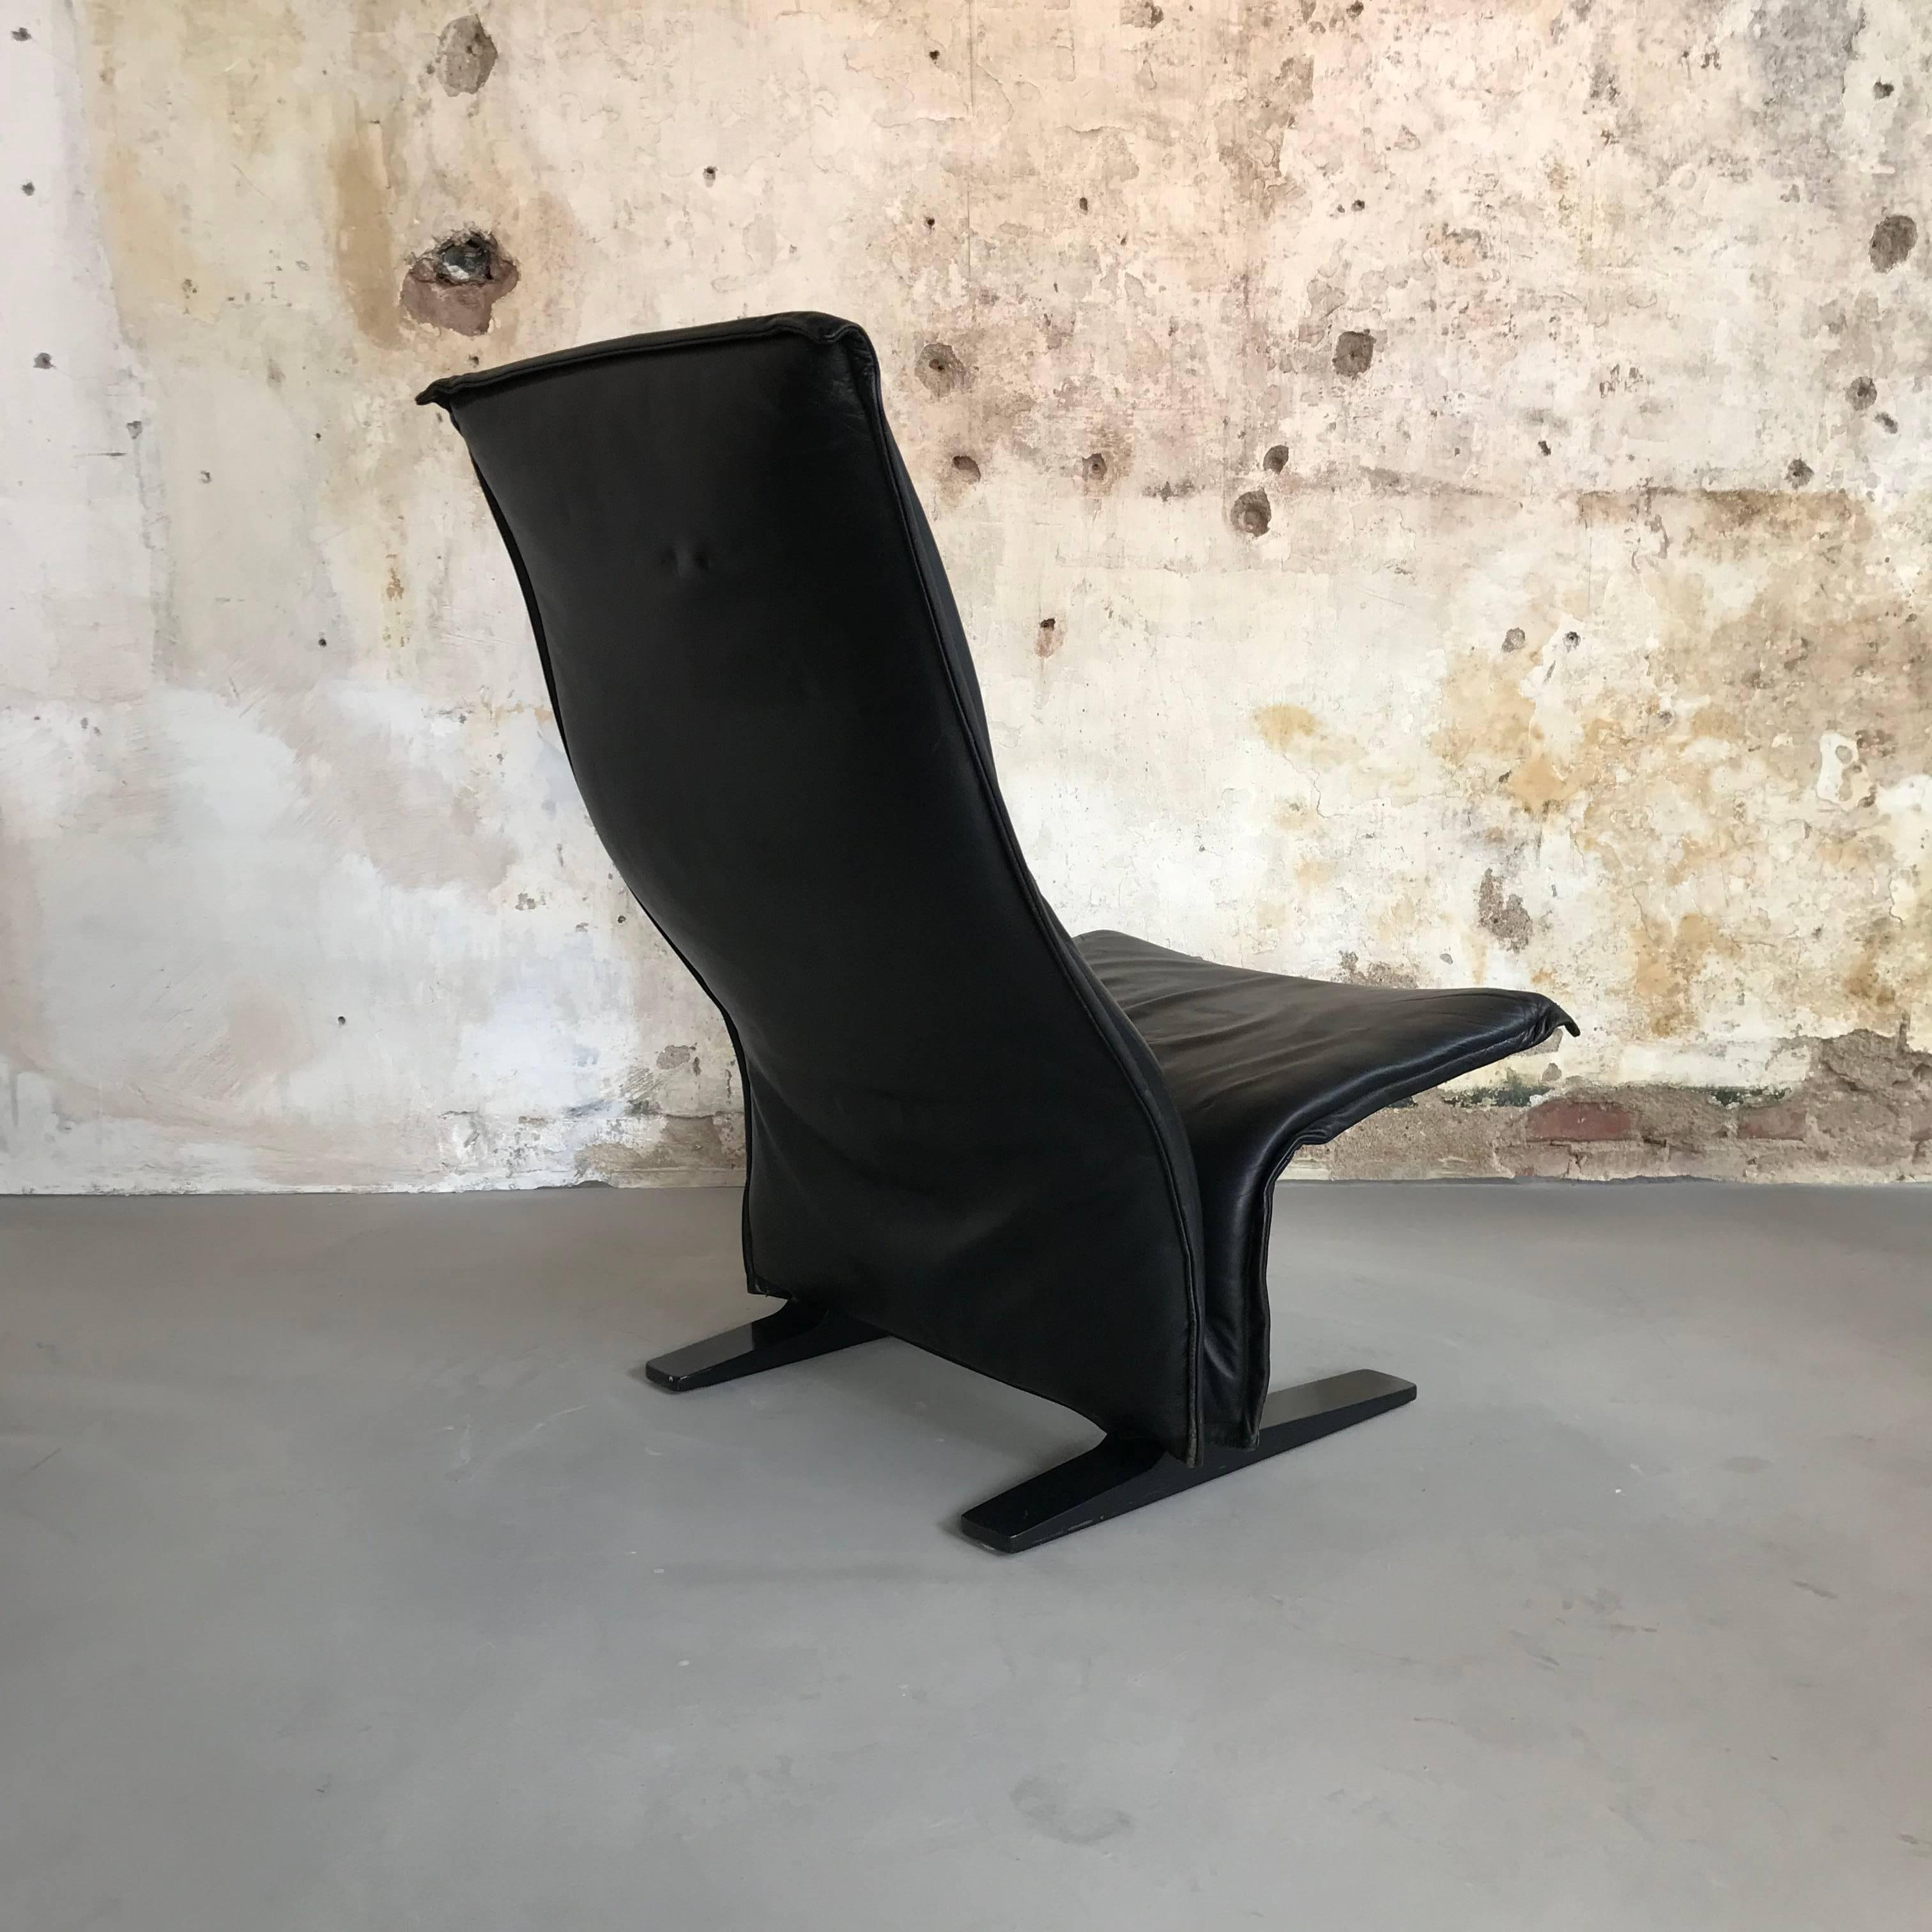 Patinated Lounge Chair Artifort Concorde F784 Pierre Paulin, Original Leather Upholstery